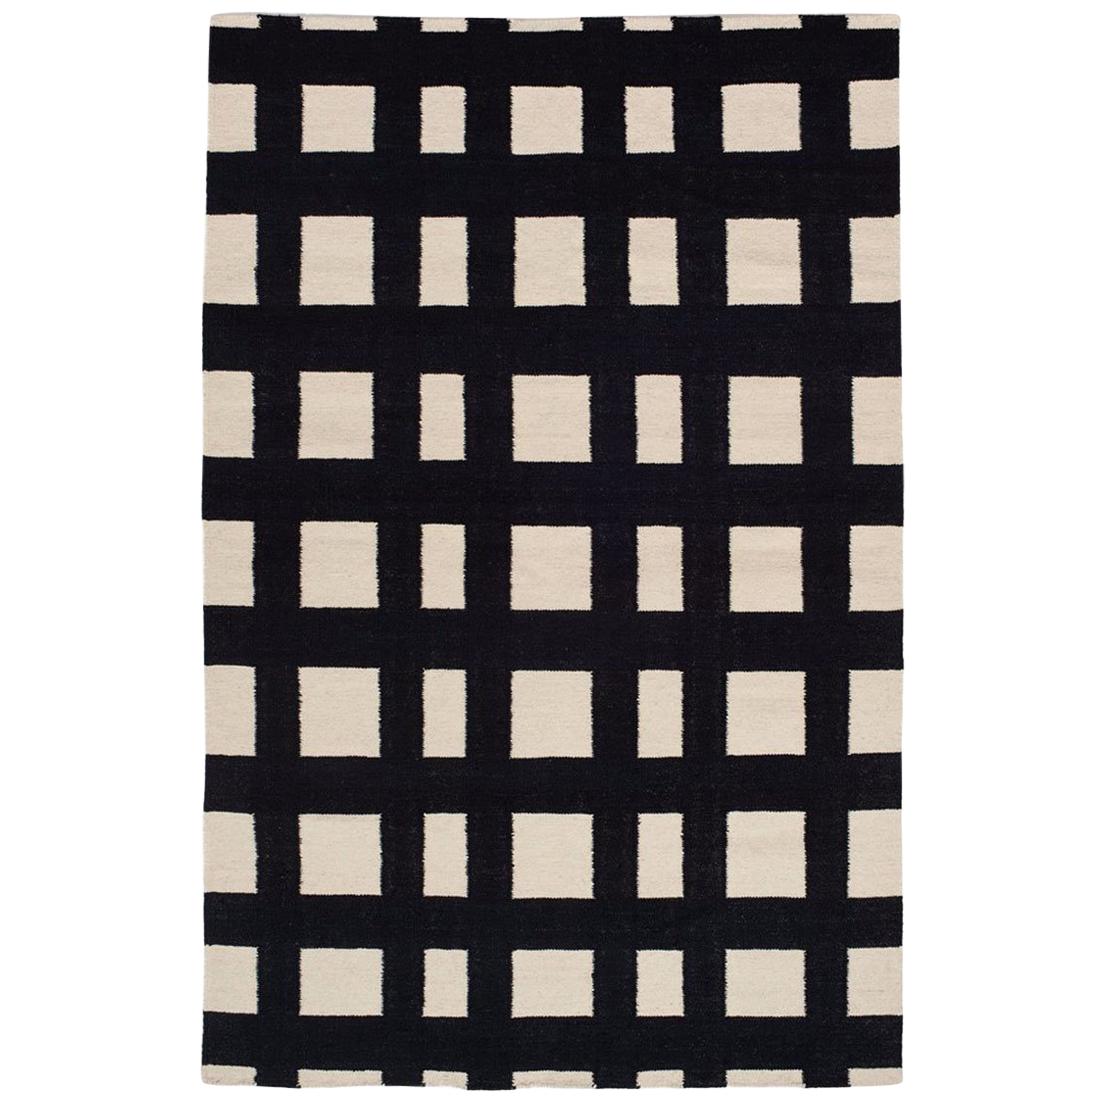 Flatwoven Modern Black and White Plaid Stripe Check Dhurrie Rug For Sale